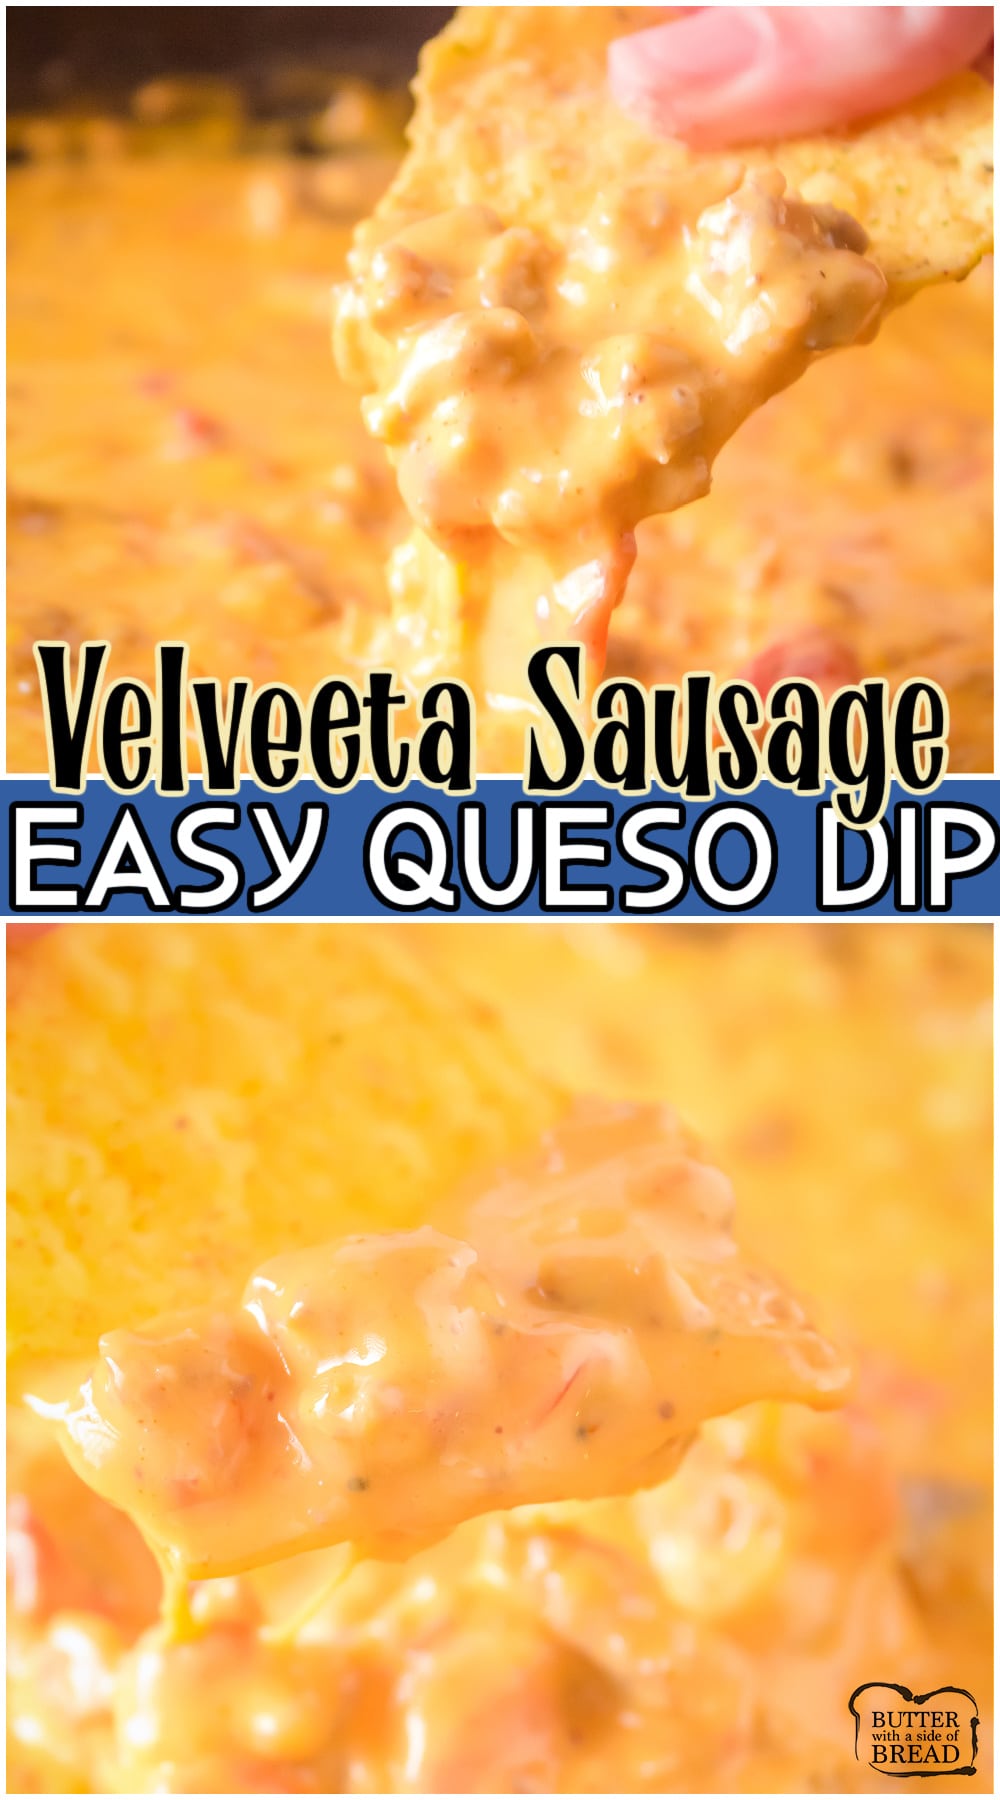 Velveeta Sausage Queso Dip is an easy appetizer recipe perfect for game day! Flavorful sausage with creamy cheese & a kick of spice; our Queso Dip Recipe has got it all!